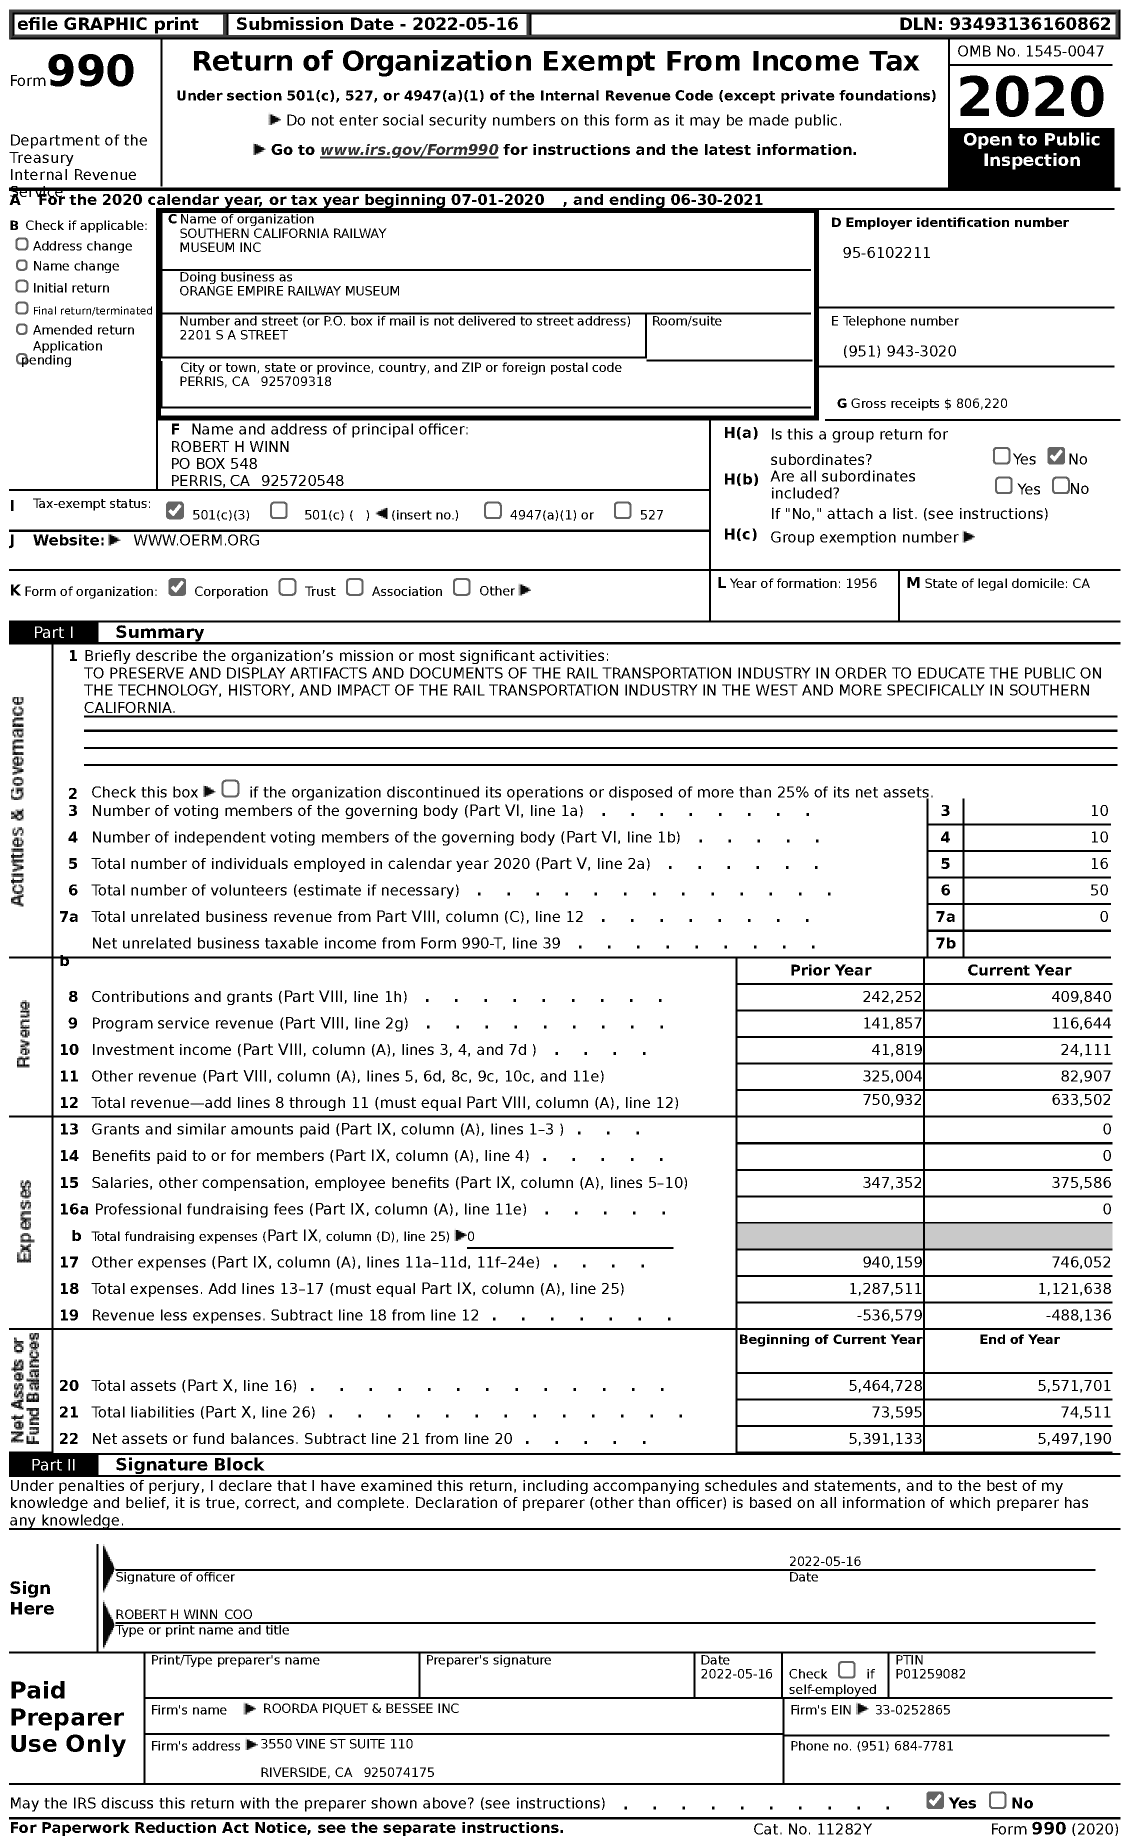 Image of first page of 2020 Form 990 for Orange Empire Railway Museum (OERM)